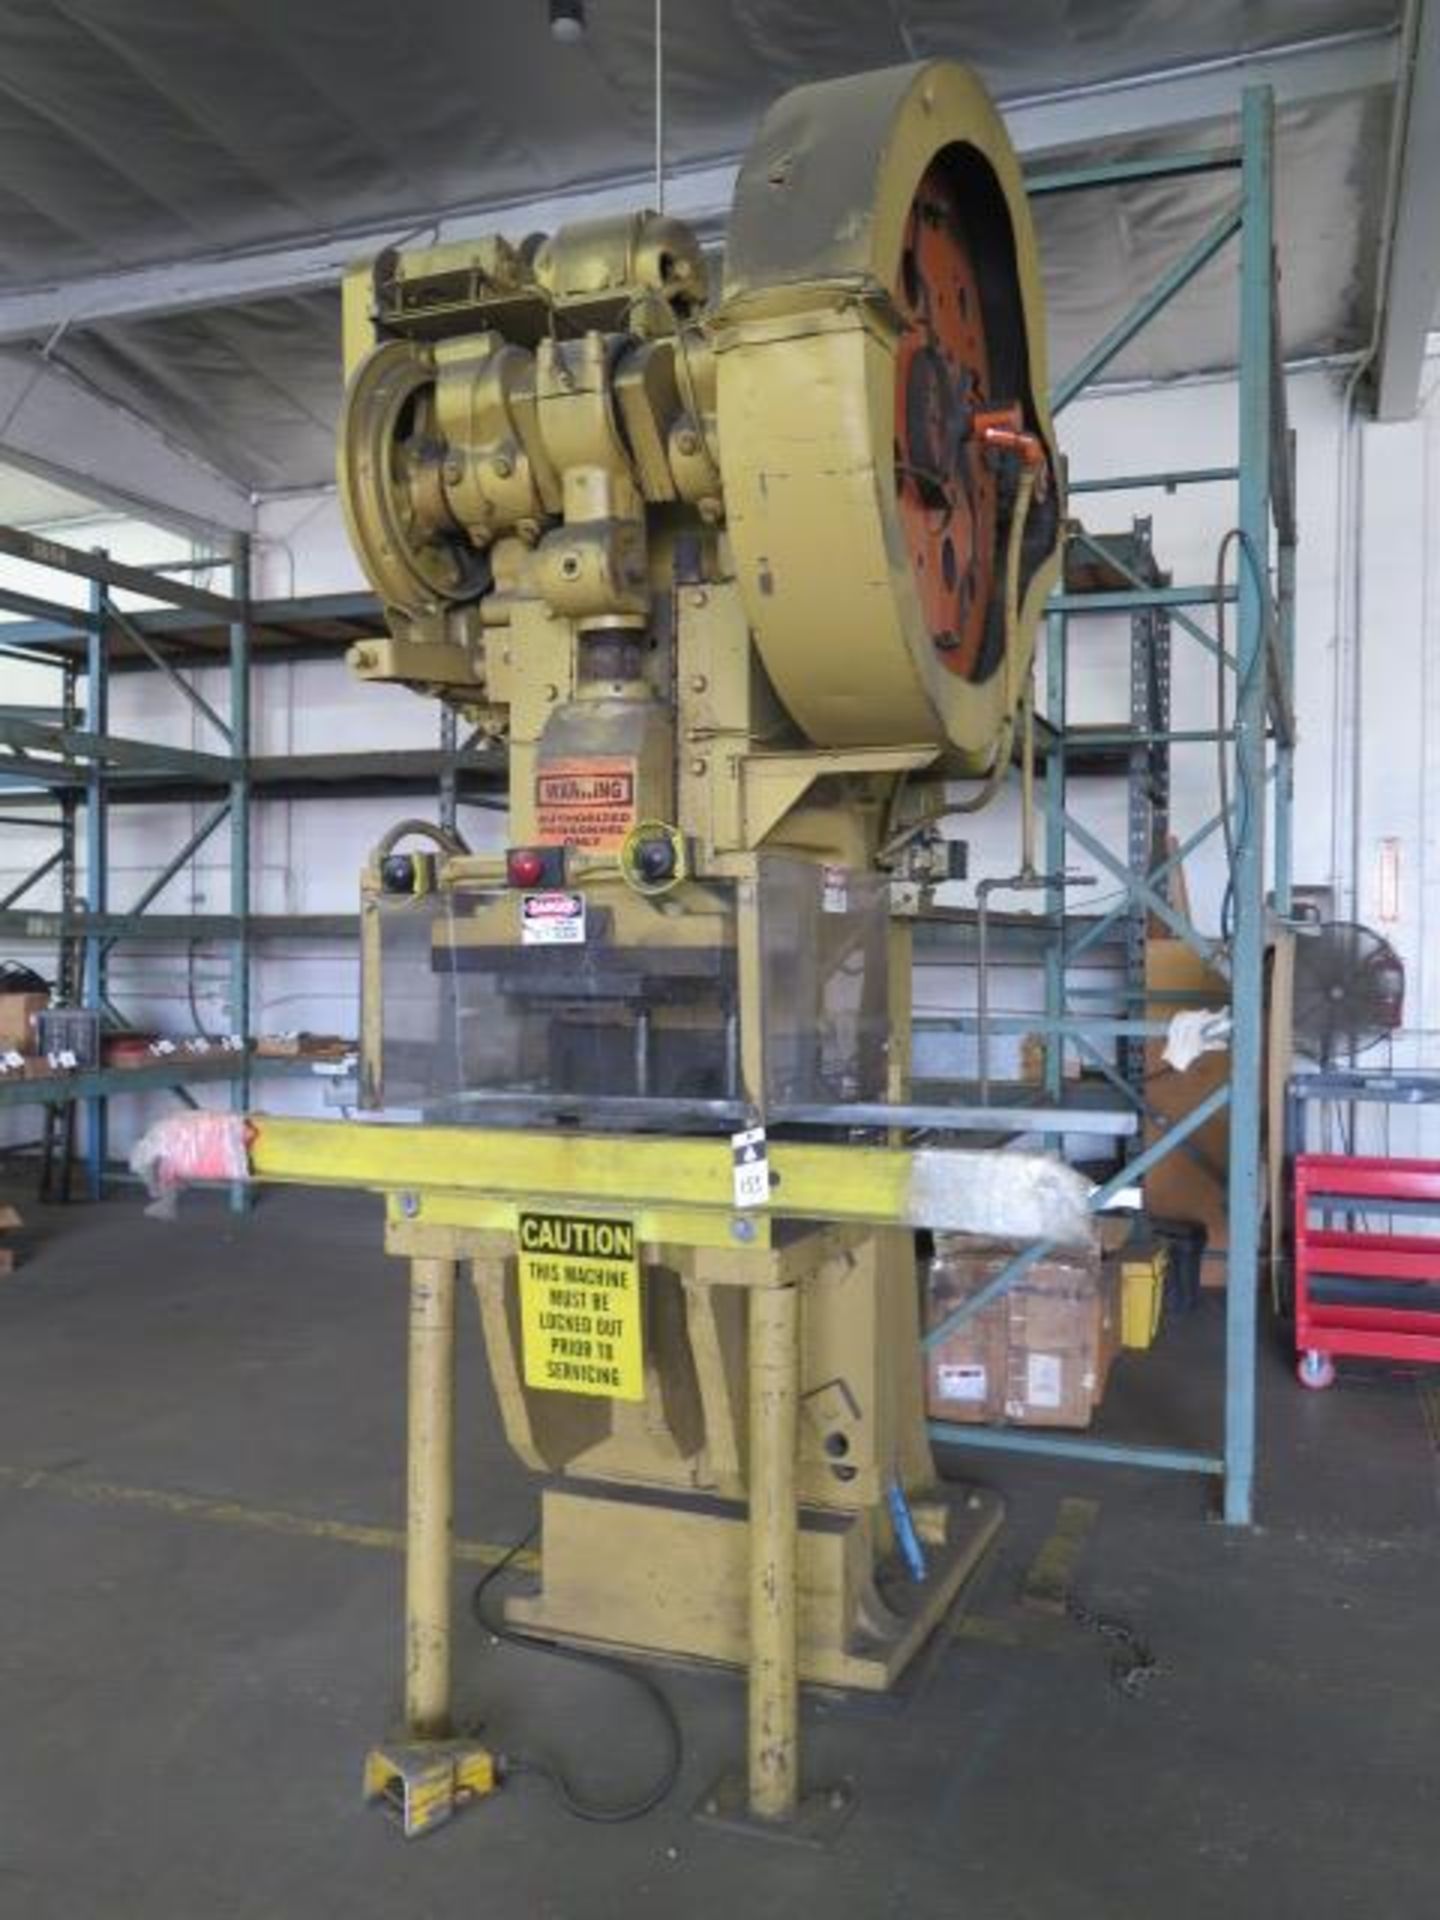 65 Ton Stamping Press w/ Pneumatic Clutch, Brake, 25” x 32” Bolster SOLD AS-IS, PARTS ONLY